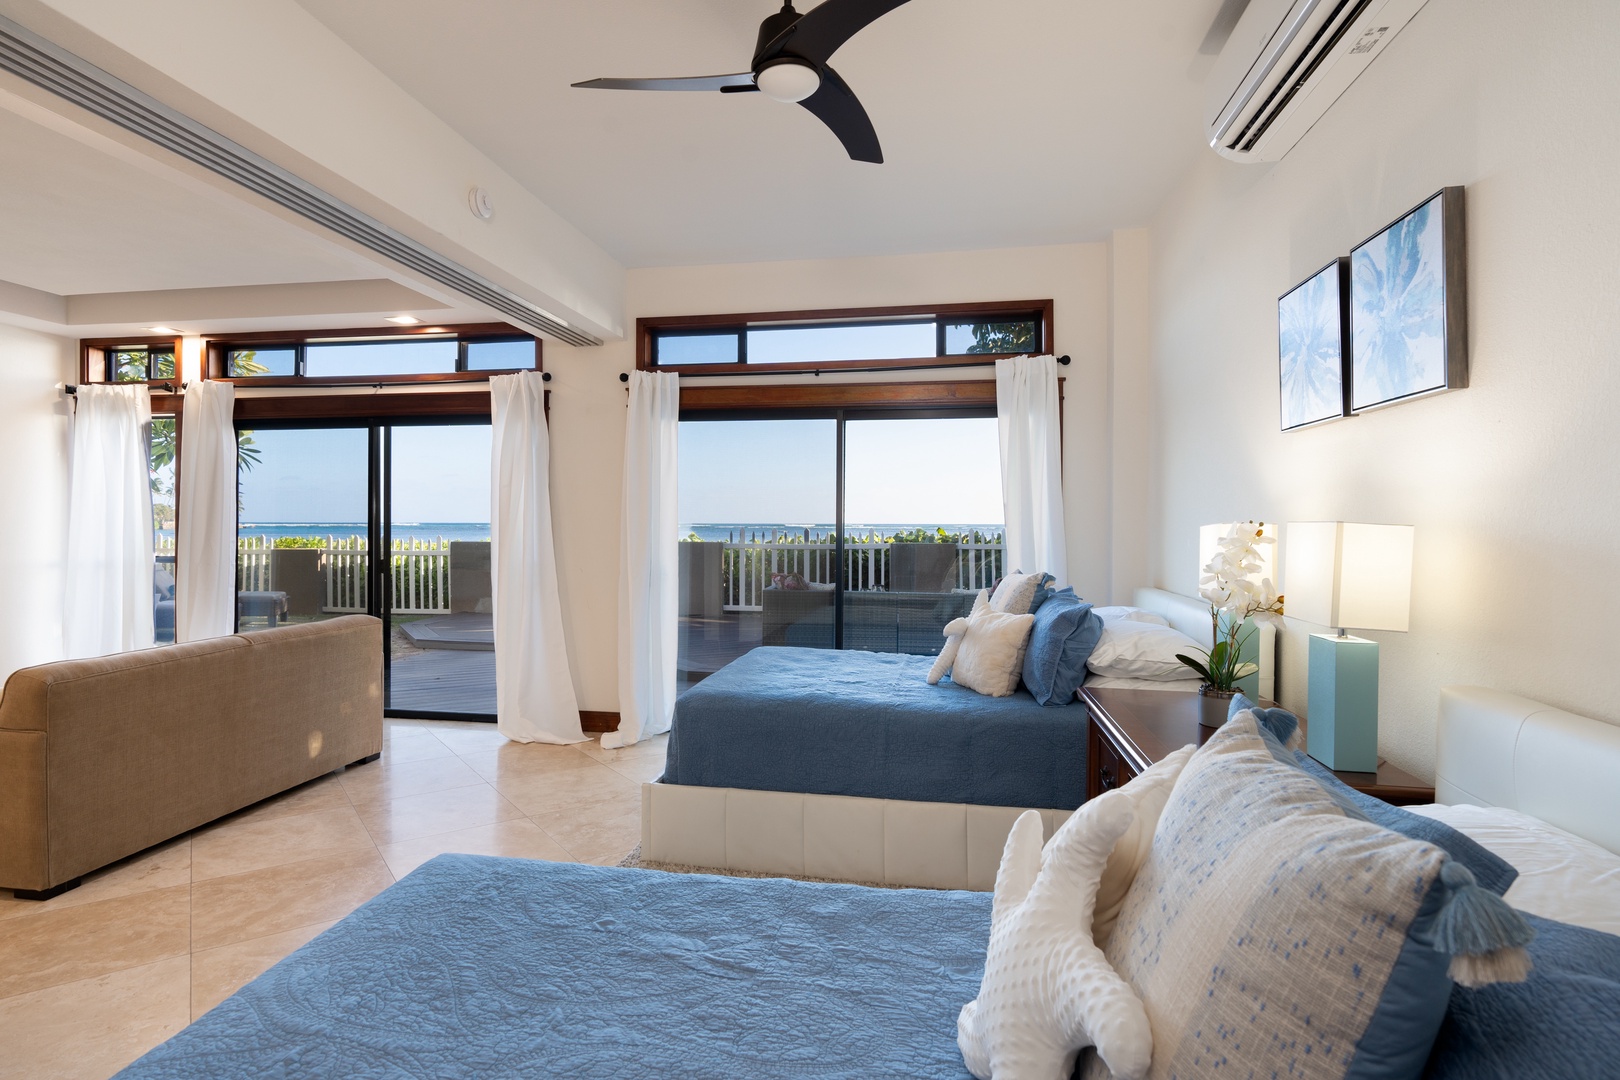 Honolulu Vacation Rentals, Wailupe Seaside - The secondary suite has two full size beds with wall of windows.